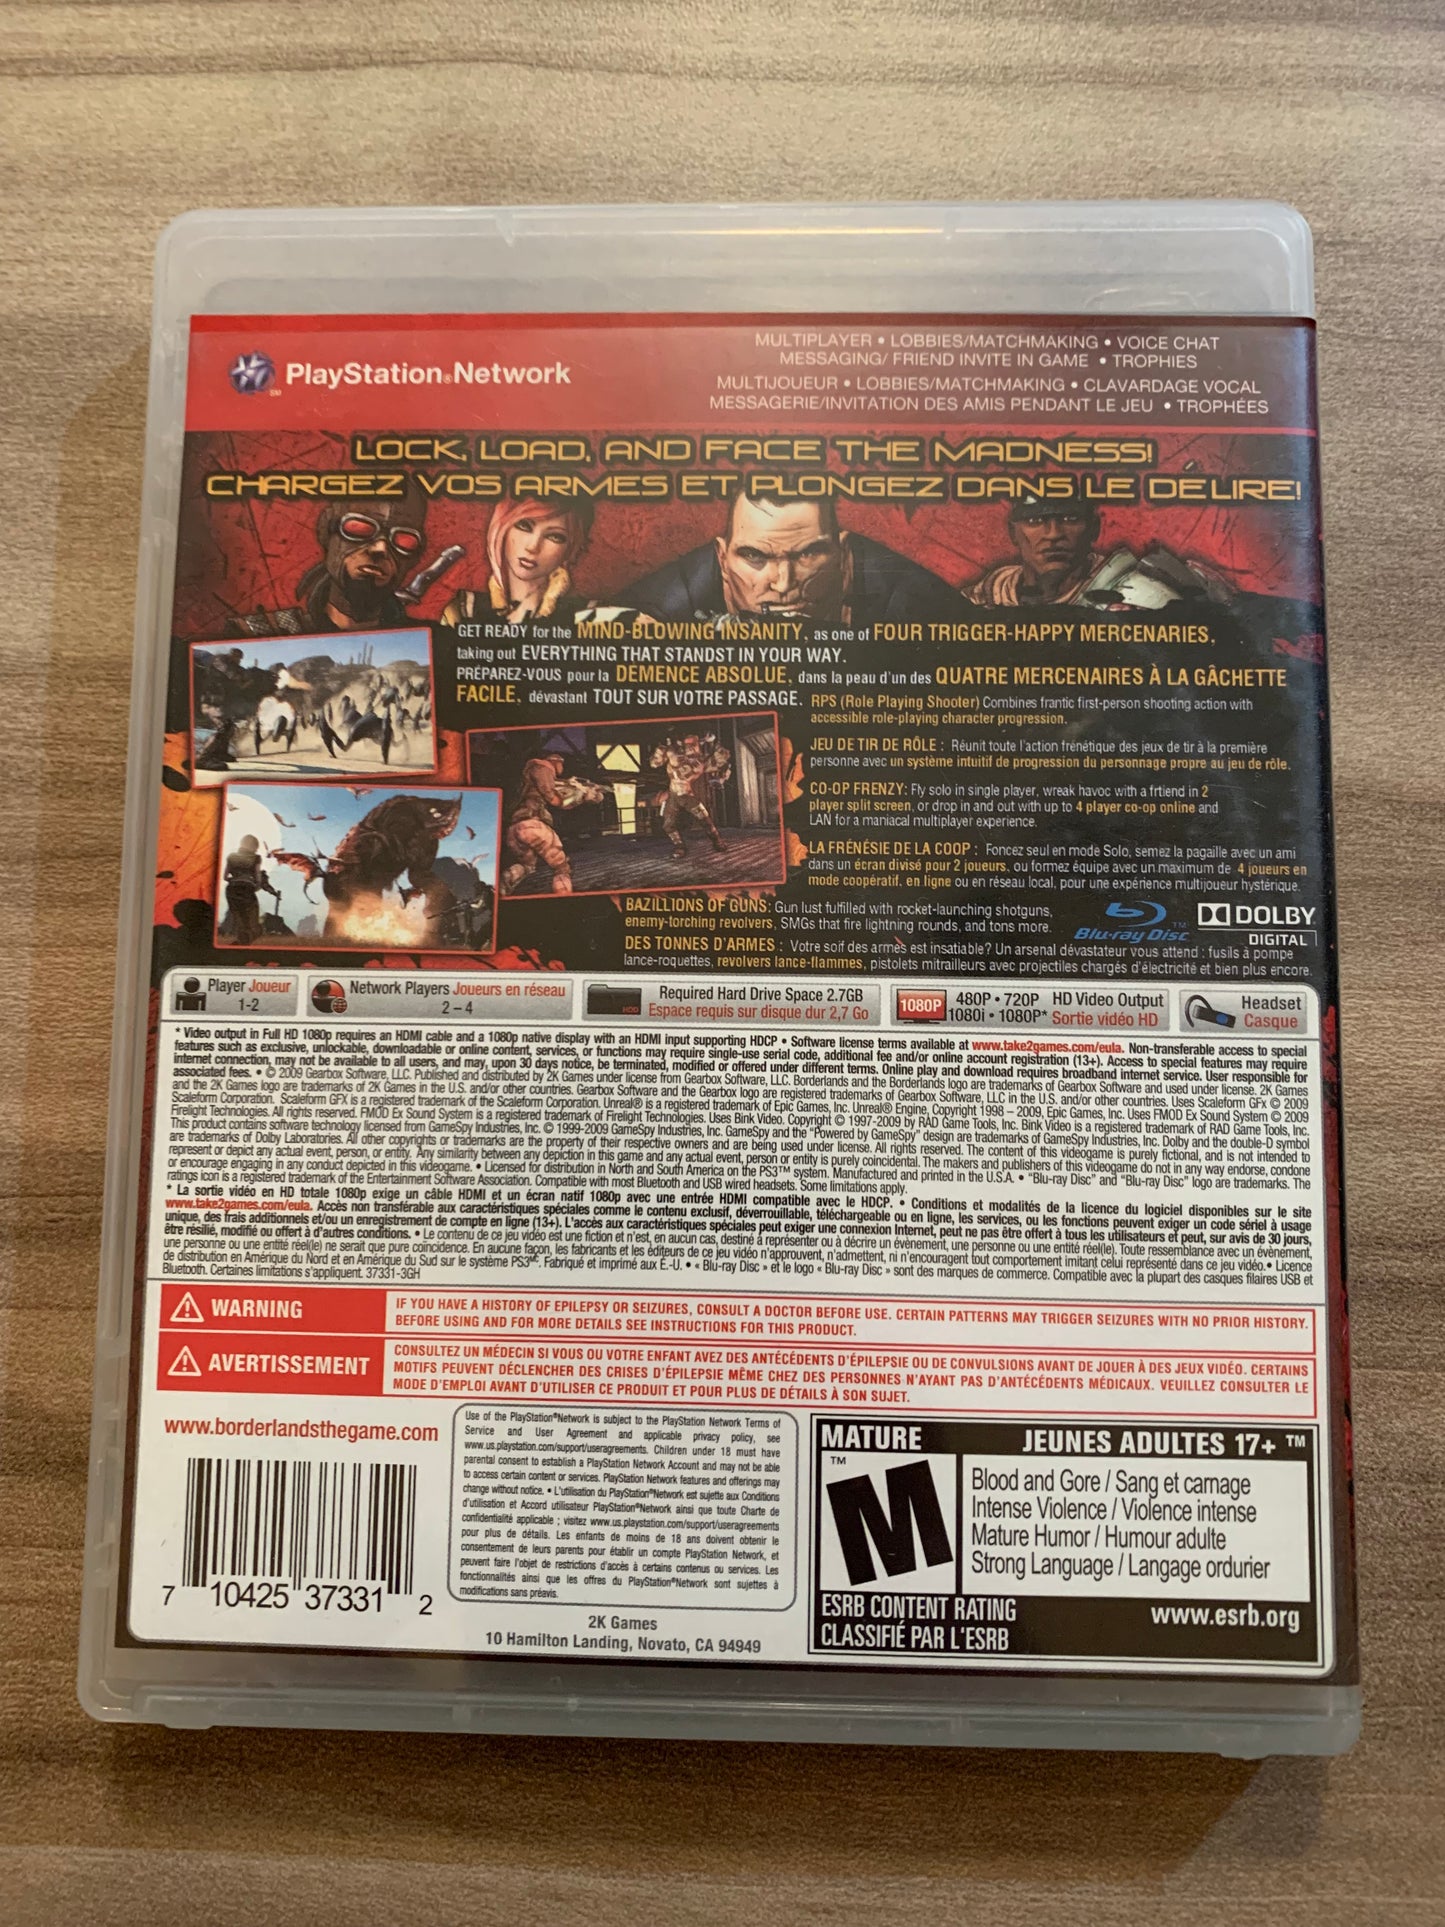 SONY PLAYSTATiON 3 [PS3] | BORDERLANDS | GREATEST HiTS